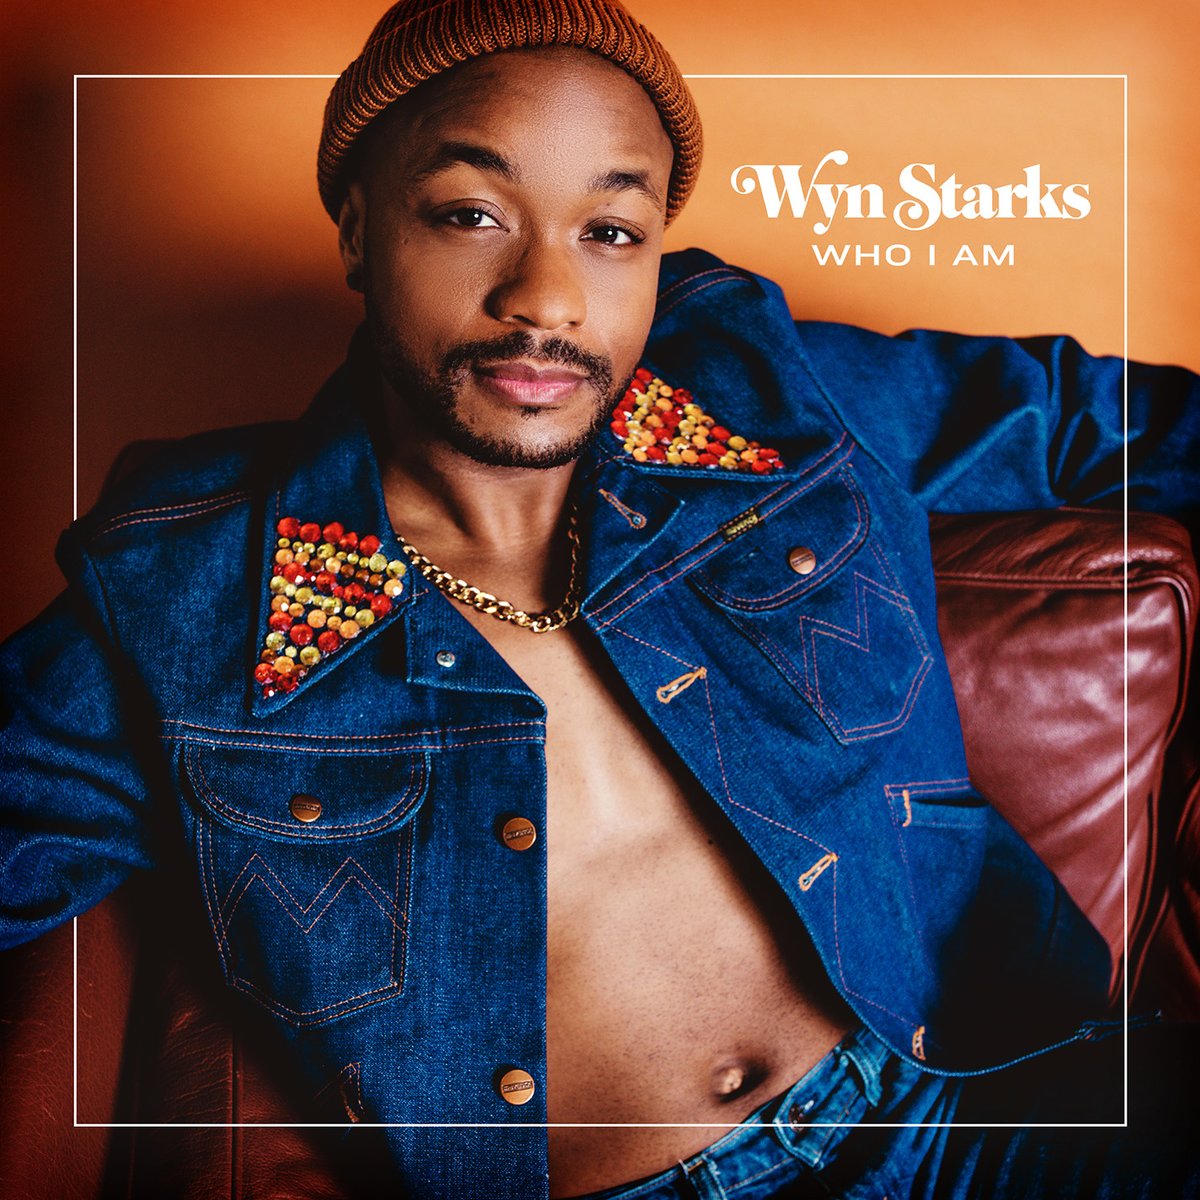 You’re going to want to keep an ear out, and @shazam handy, as @WynStarks 'Who I Am', on Sidewalk Records plays overhead in stores, restaurants and malls everywhere. Stream it HERE on your favorite music service >>> bit.ly/3sdwNEN